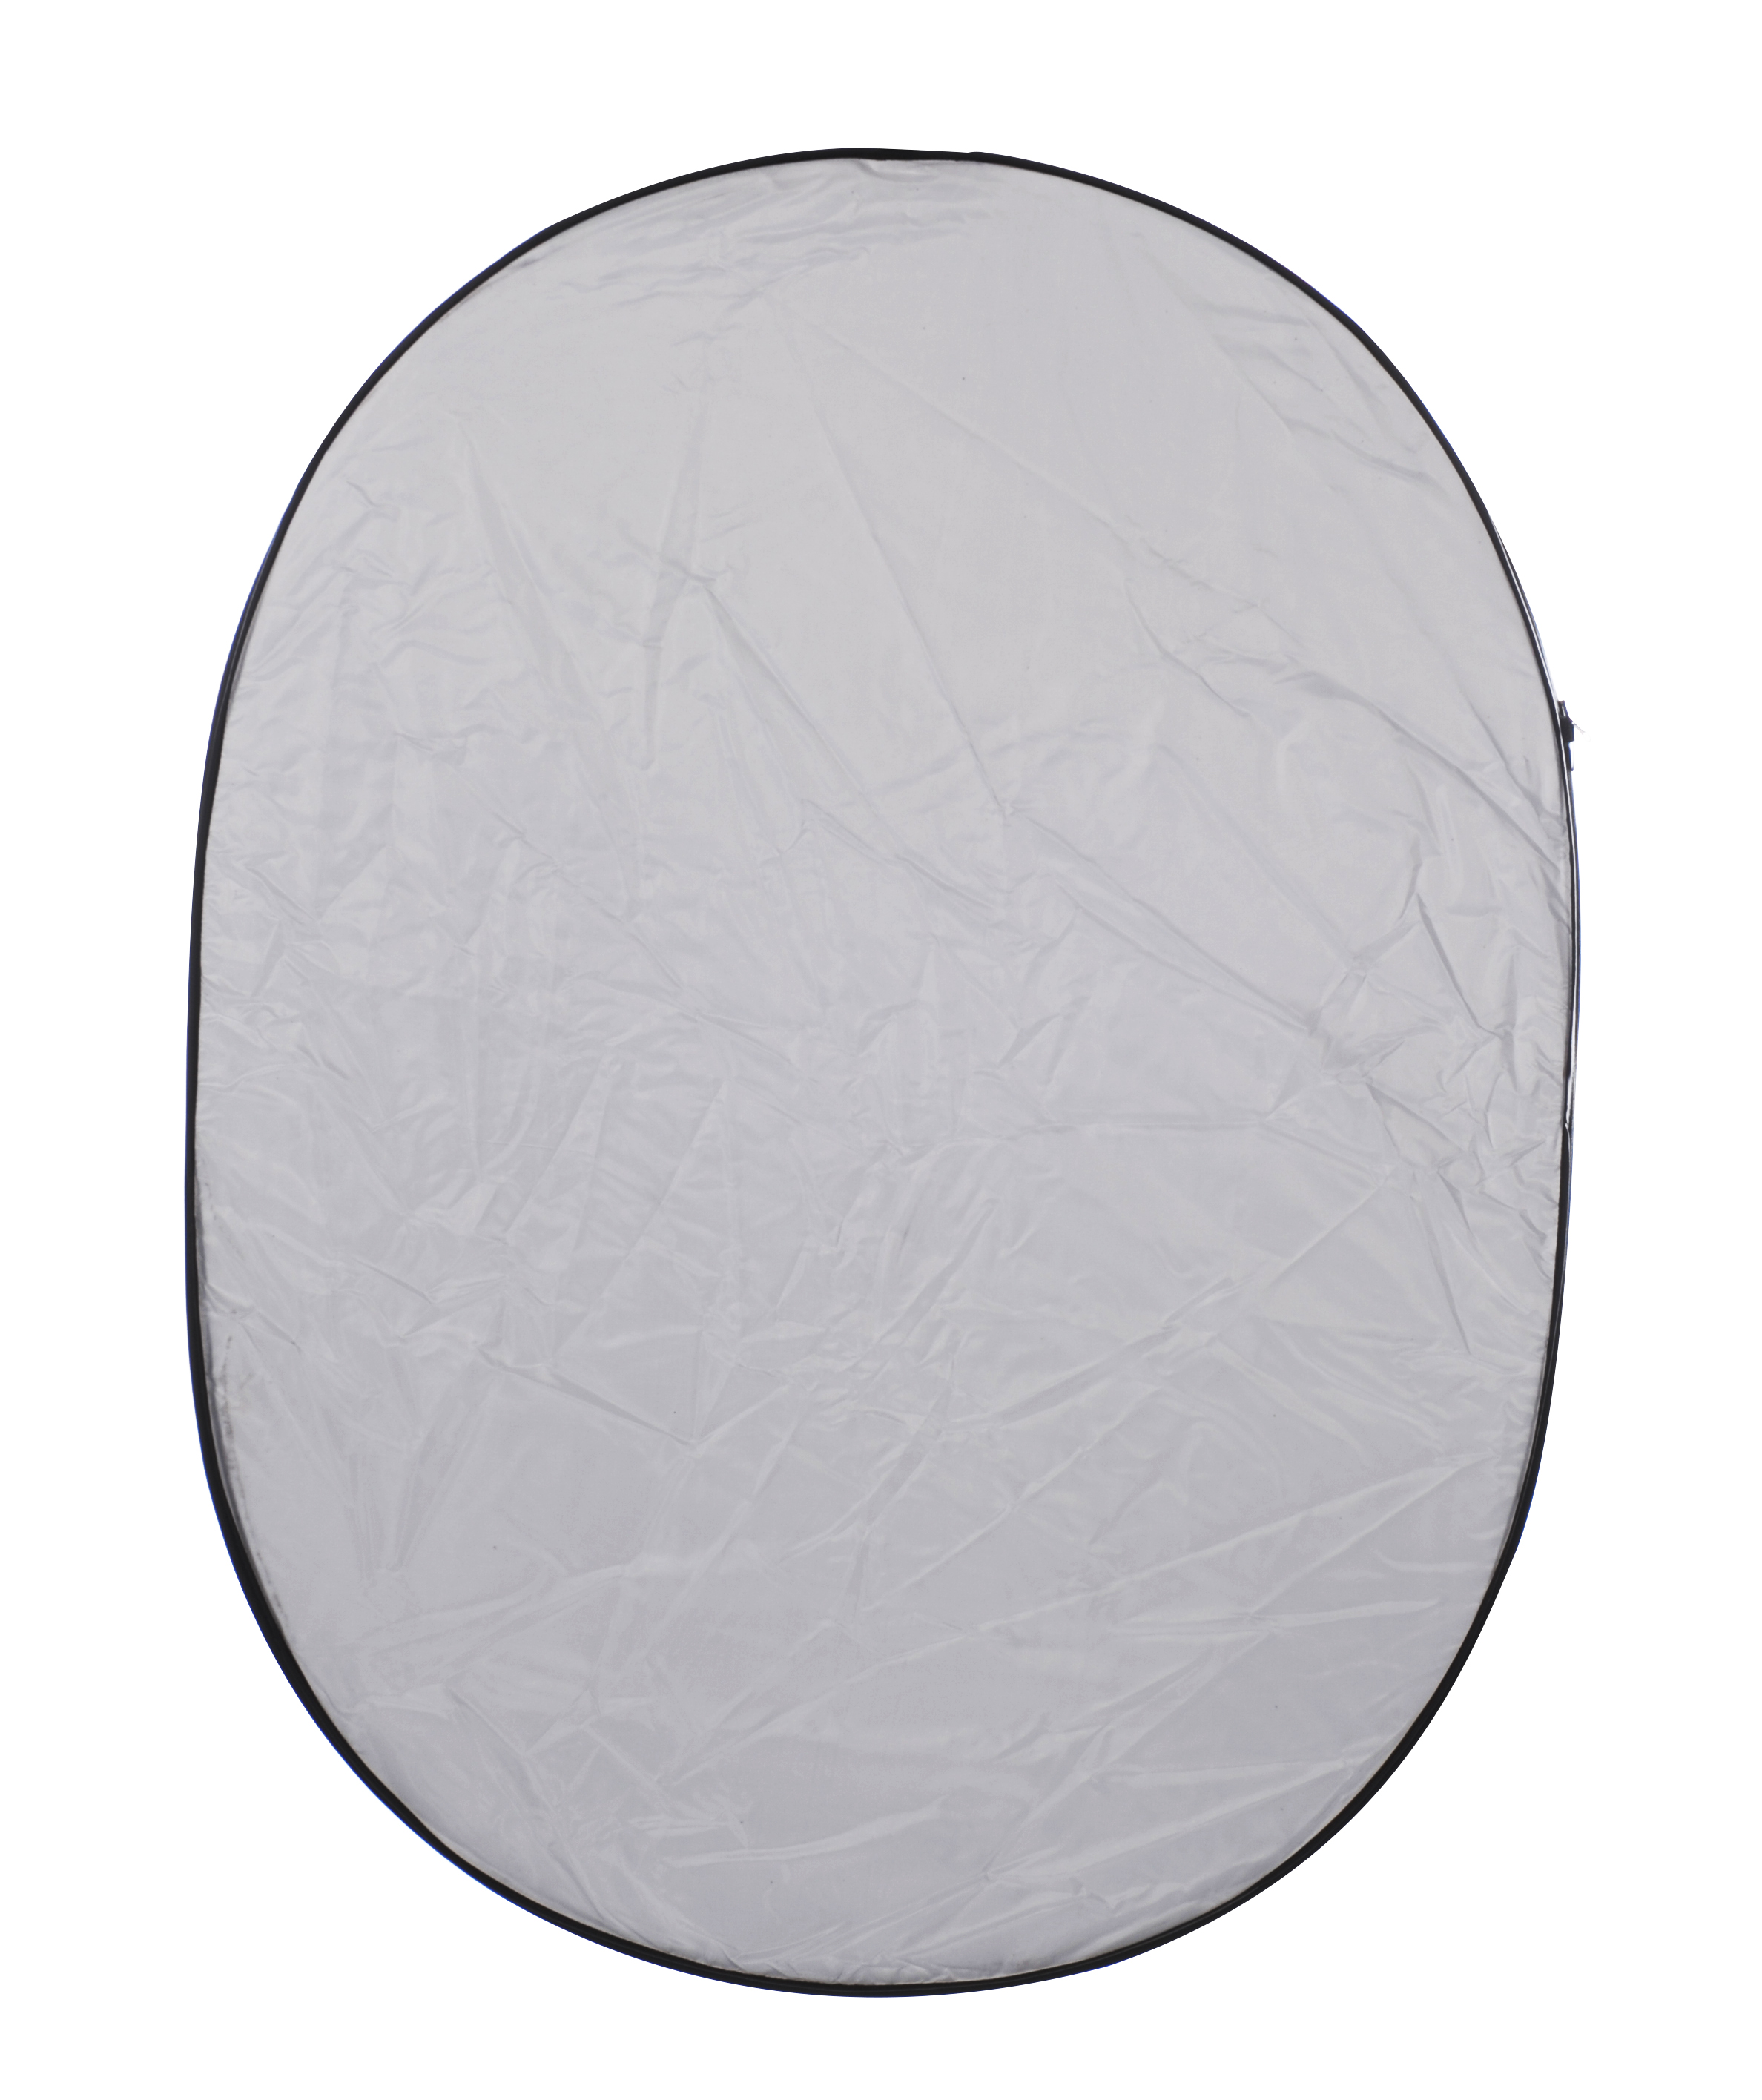 BRESSER BR-TR1 5 in 1 Collapsible Reflector 100x150cm